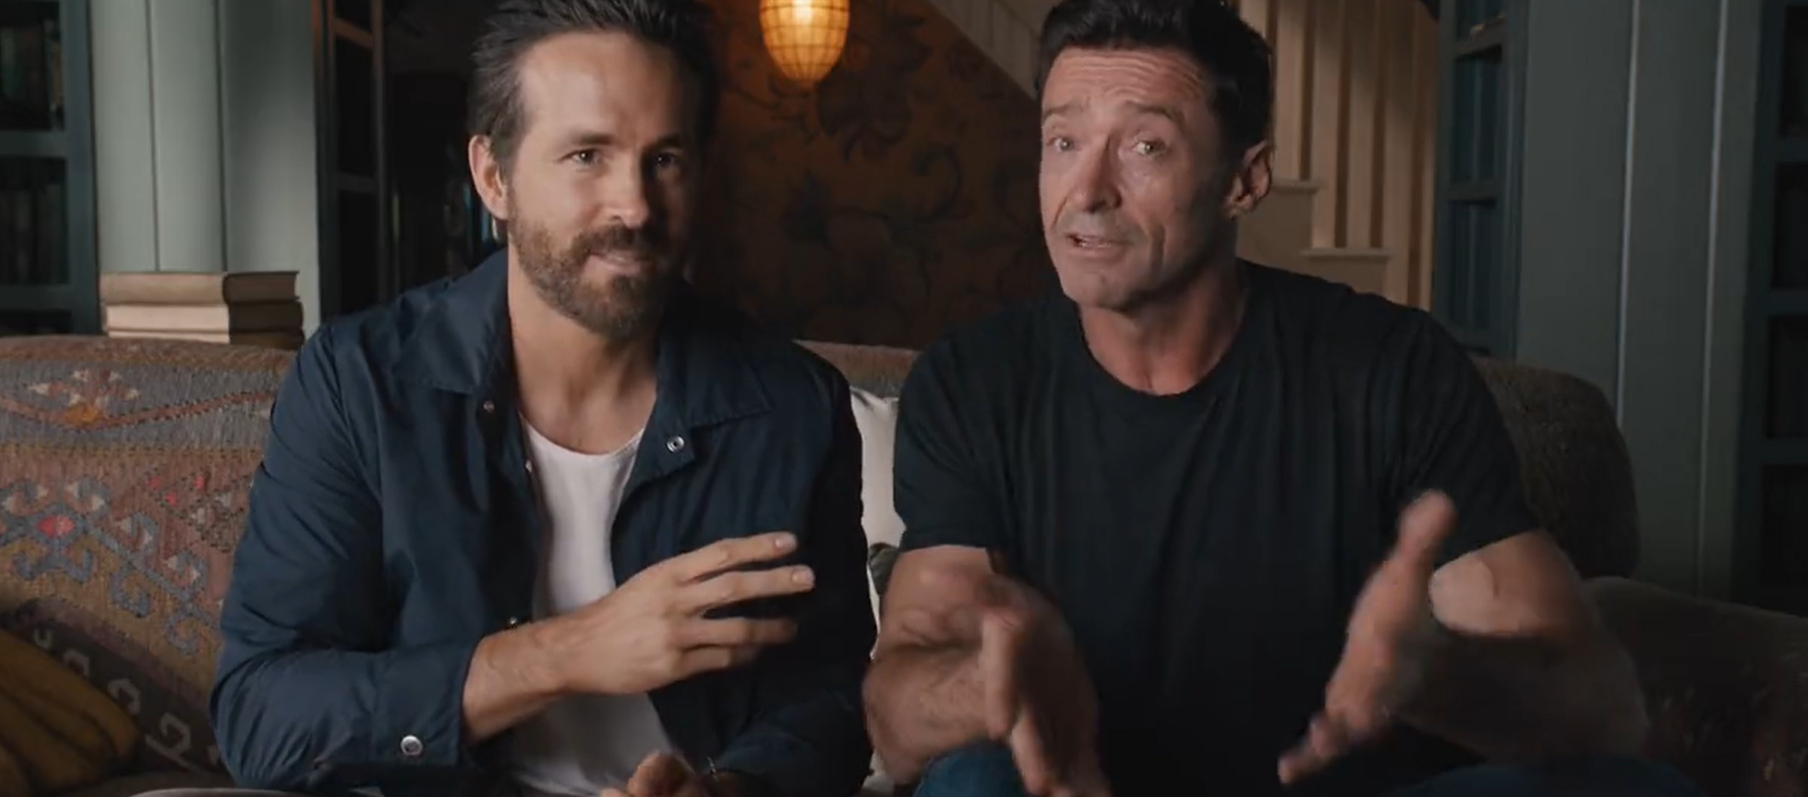 Ryan Reynolds and Hugh Jackman sitting side by side on a couch